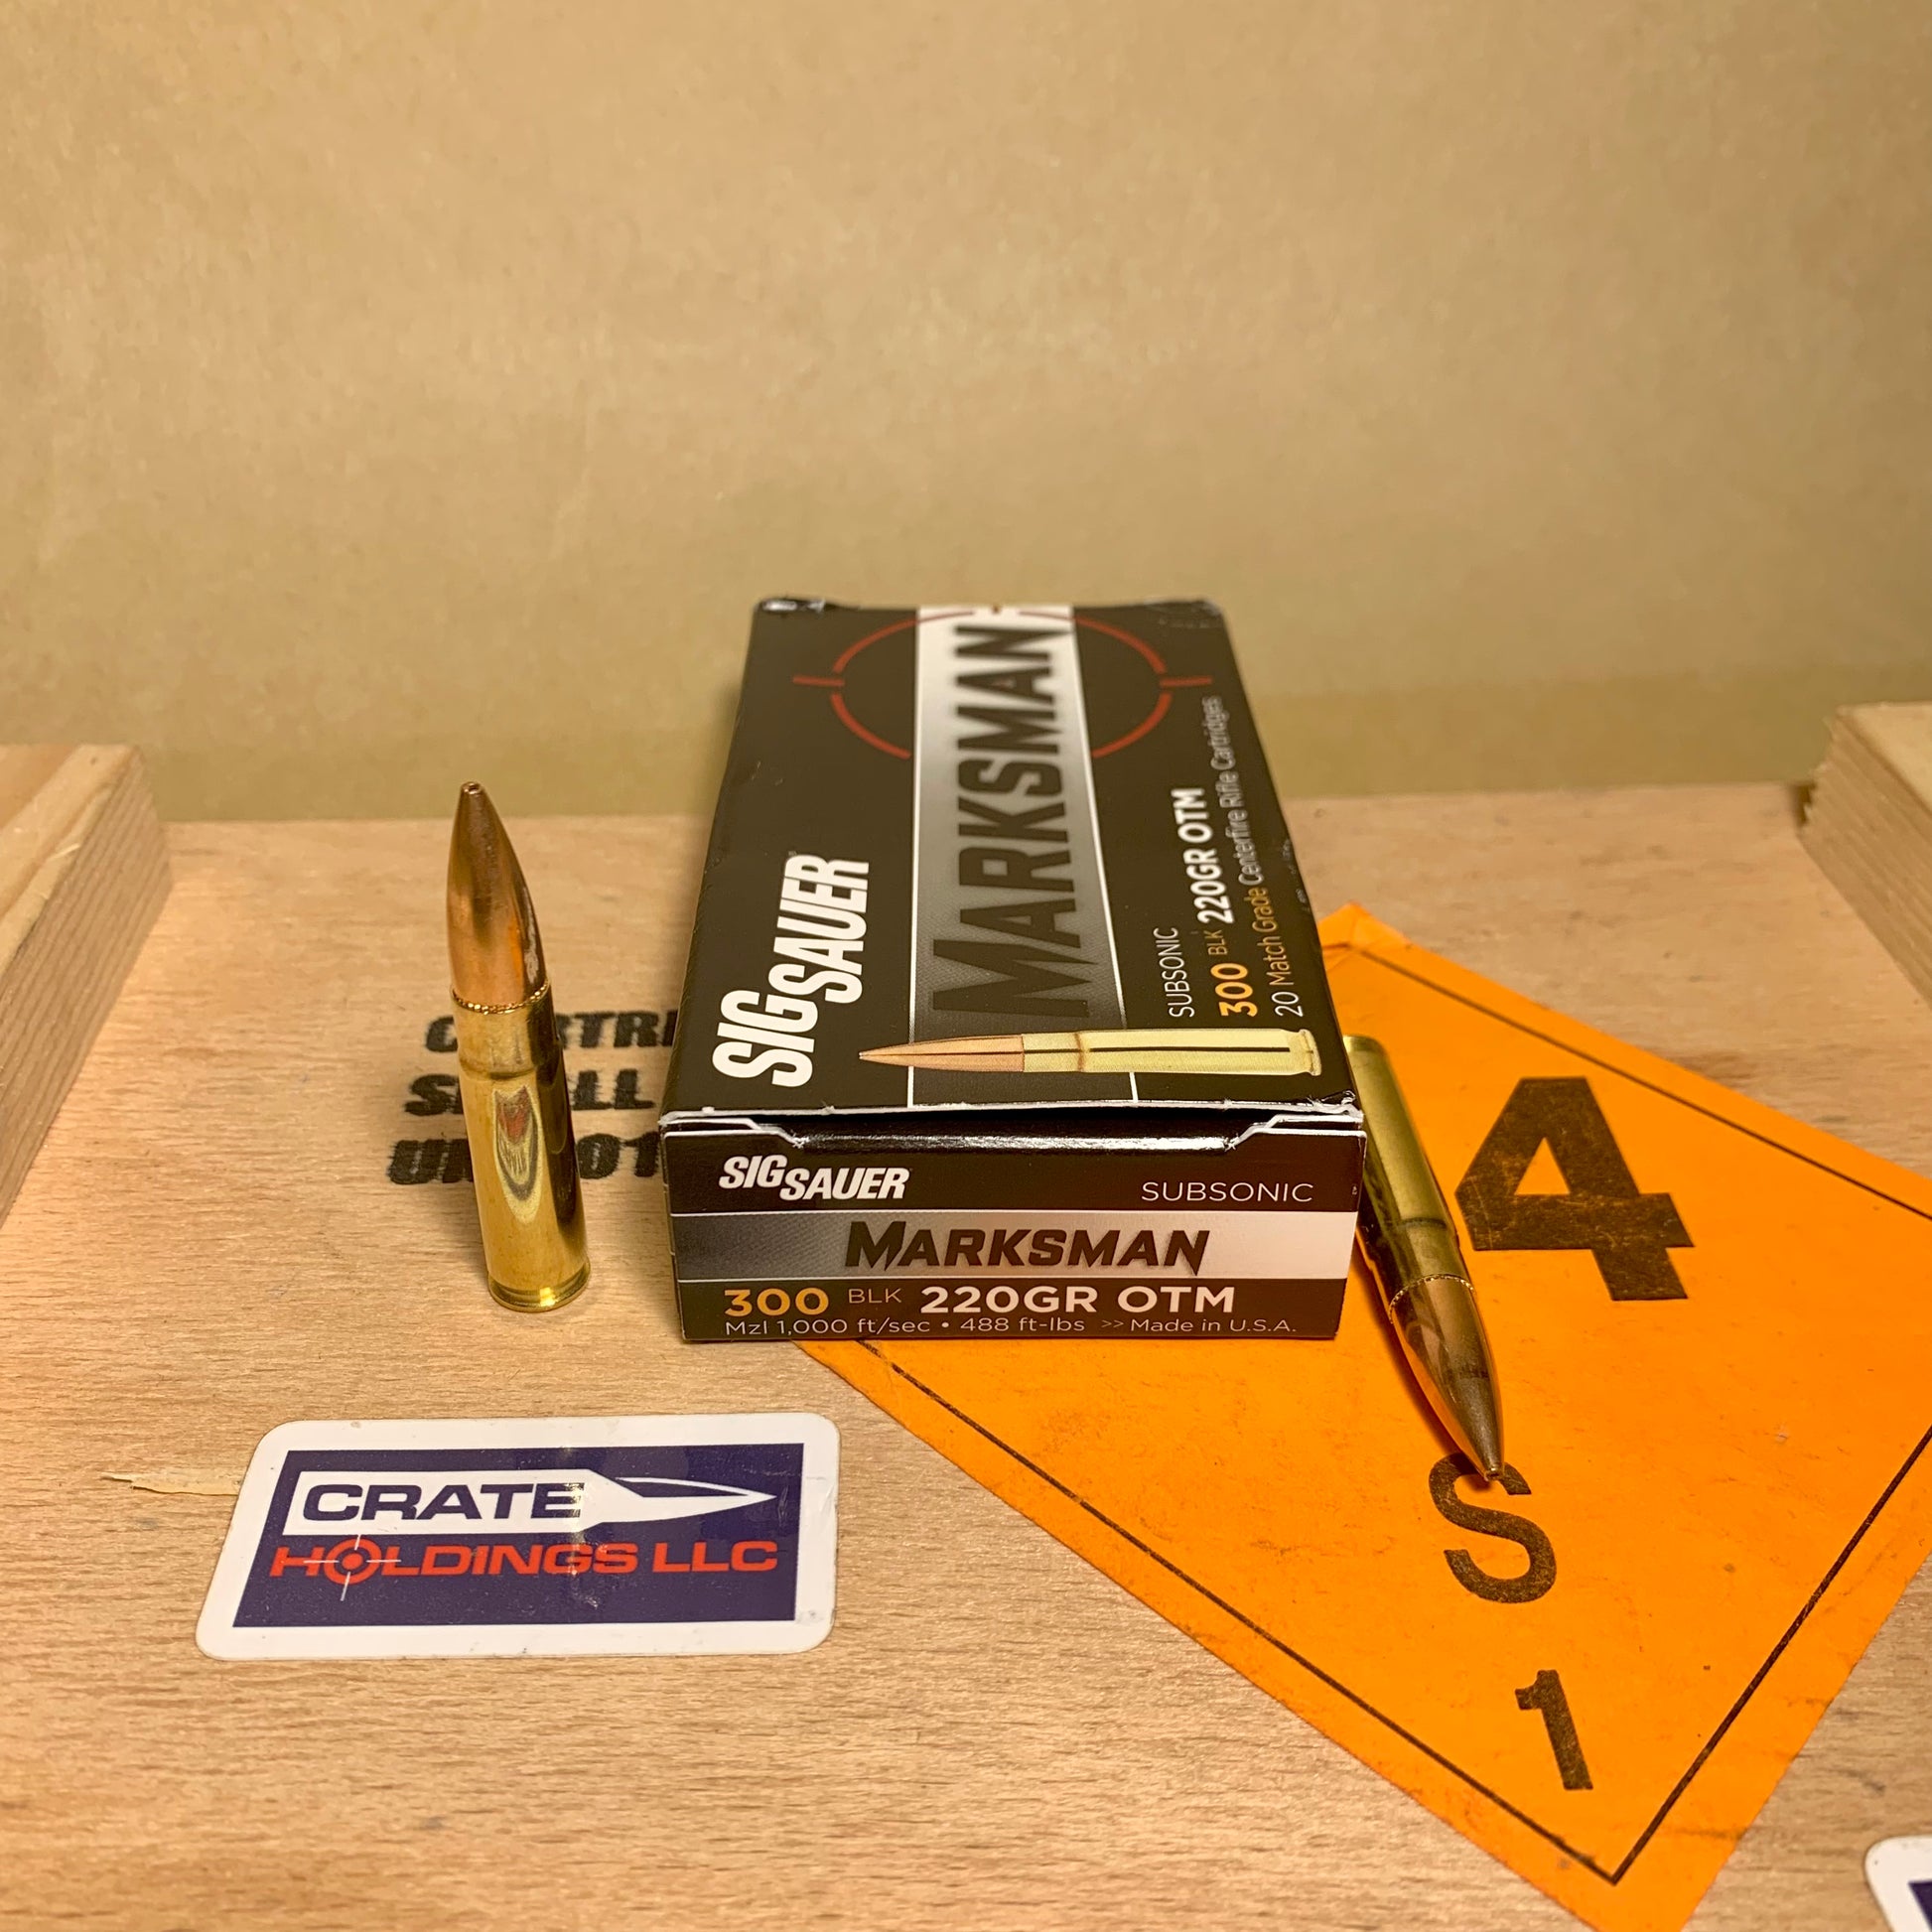 20 Round Box Sig Sauer Subsonic .300 AAC Blackout Ammo 220gr OTM - XI514496